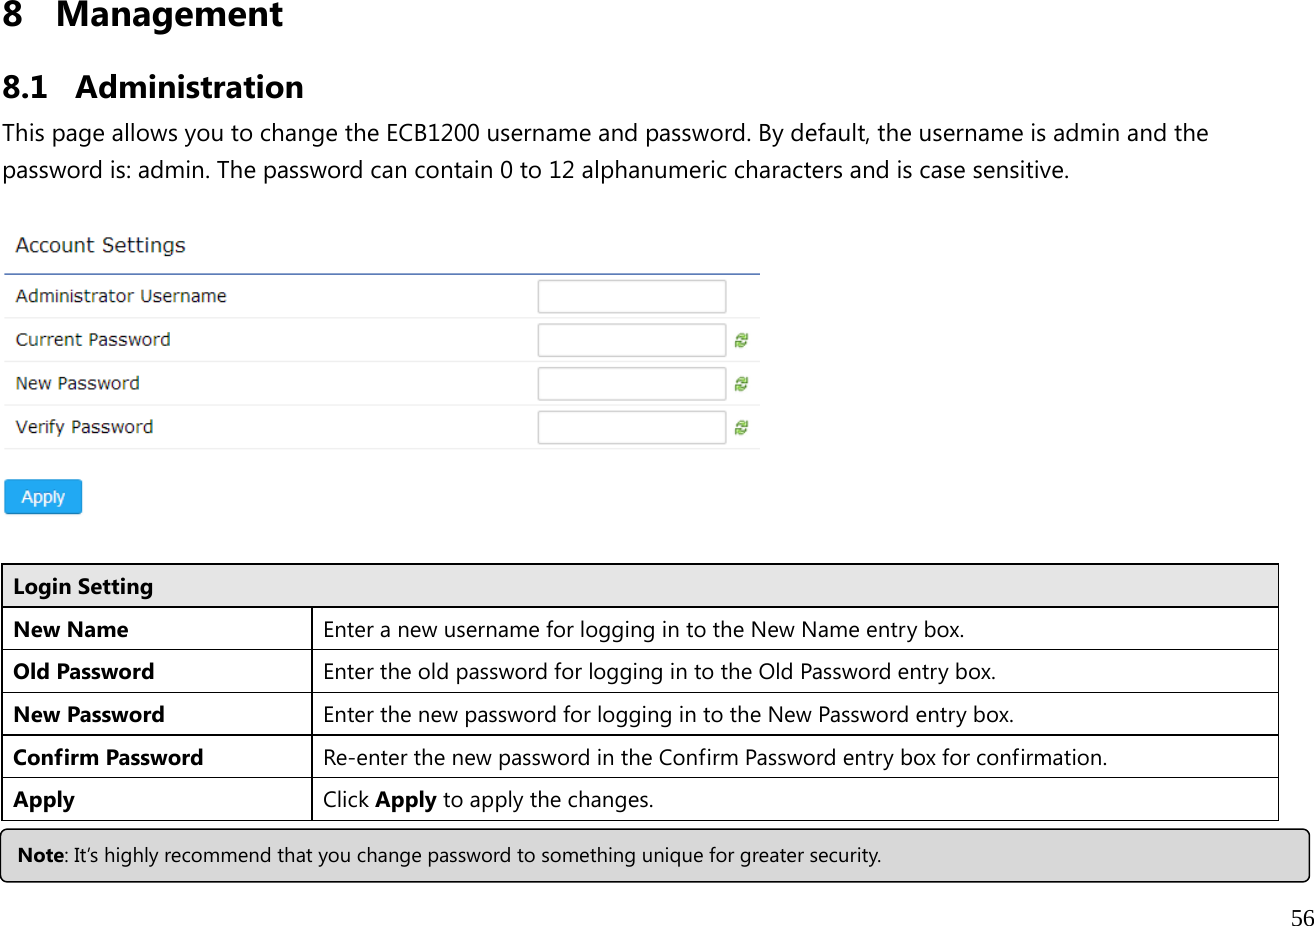  56  8 Management  8.1 Administration This page allows you to change the ECB1200 username and password. By default, the username is admin and the password is: admin. The password can contain 0 to 12 alphanumeric characters and is case sensitive.    Login Setting New Name  Enter a new username for logging in to the New Name entry box. Old Password  Enter the old password for logging in to the Old Password entry box.New Password  Enter the new password for logging in to the New Password entry box. Confirm Password  Re-enter the new password in the Confirm Password entry box for confirmation. Apply  Click Apply to apply the changes.  Note: It’s highly recommend that you change password to something unique for greater security. 